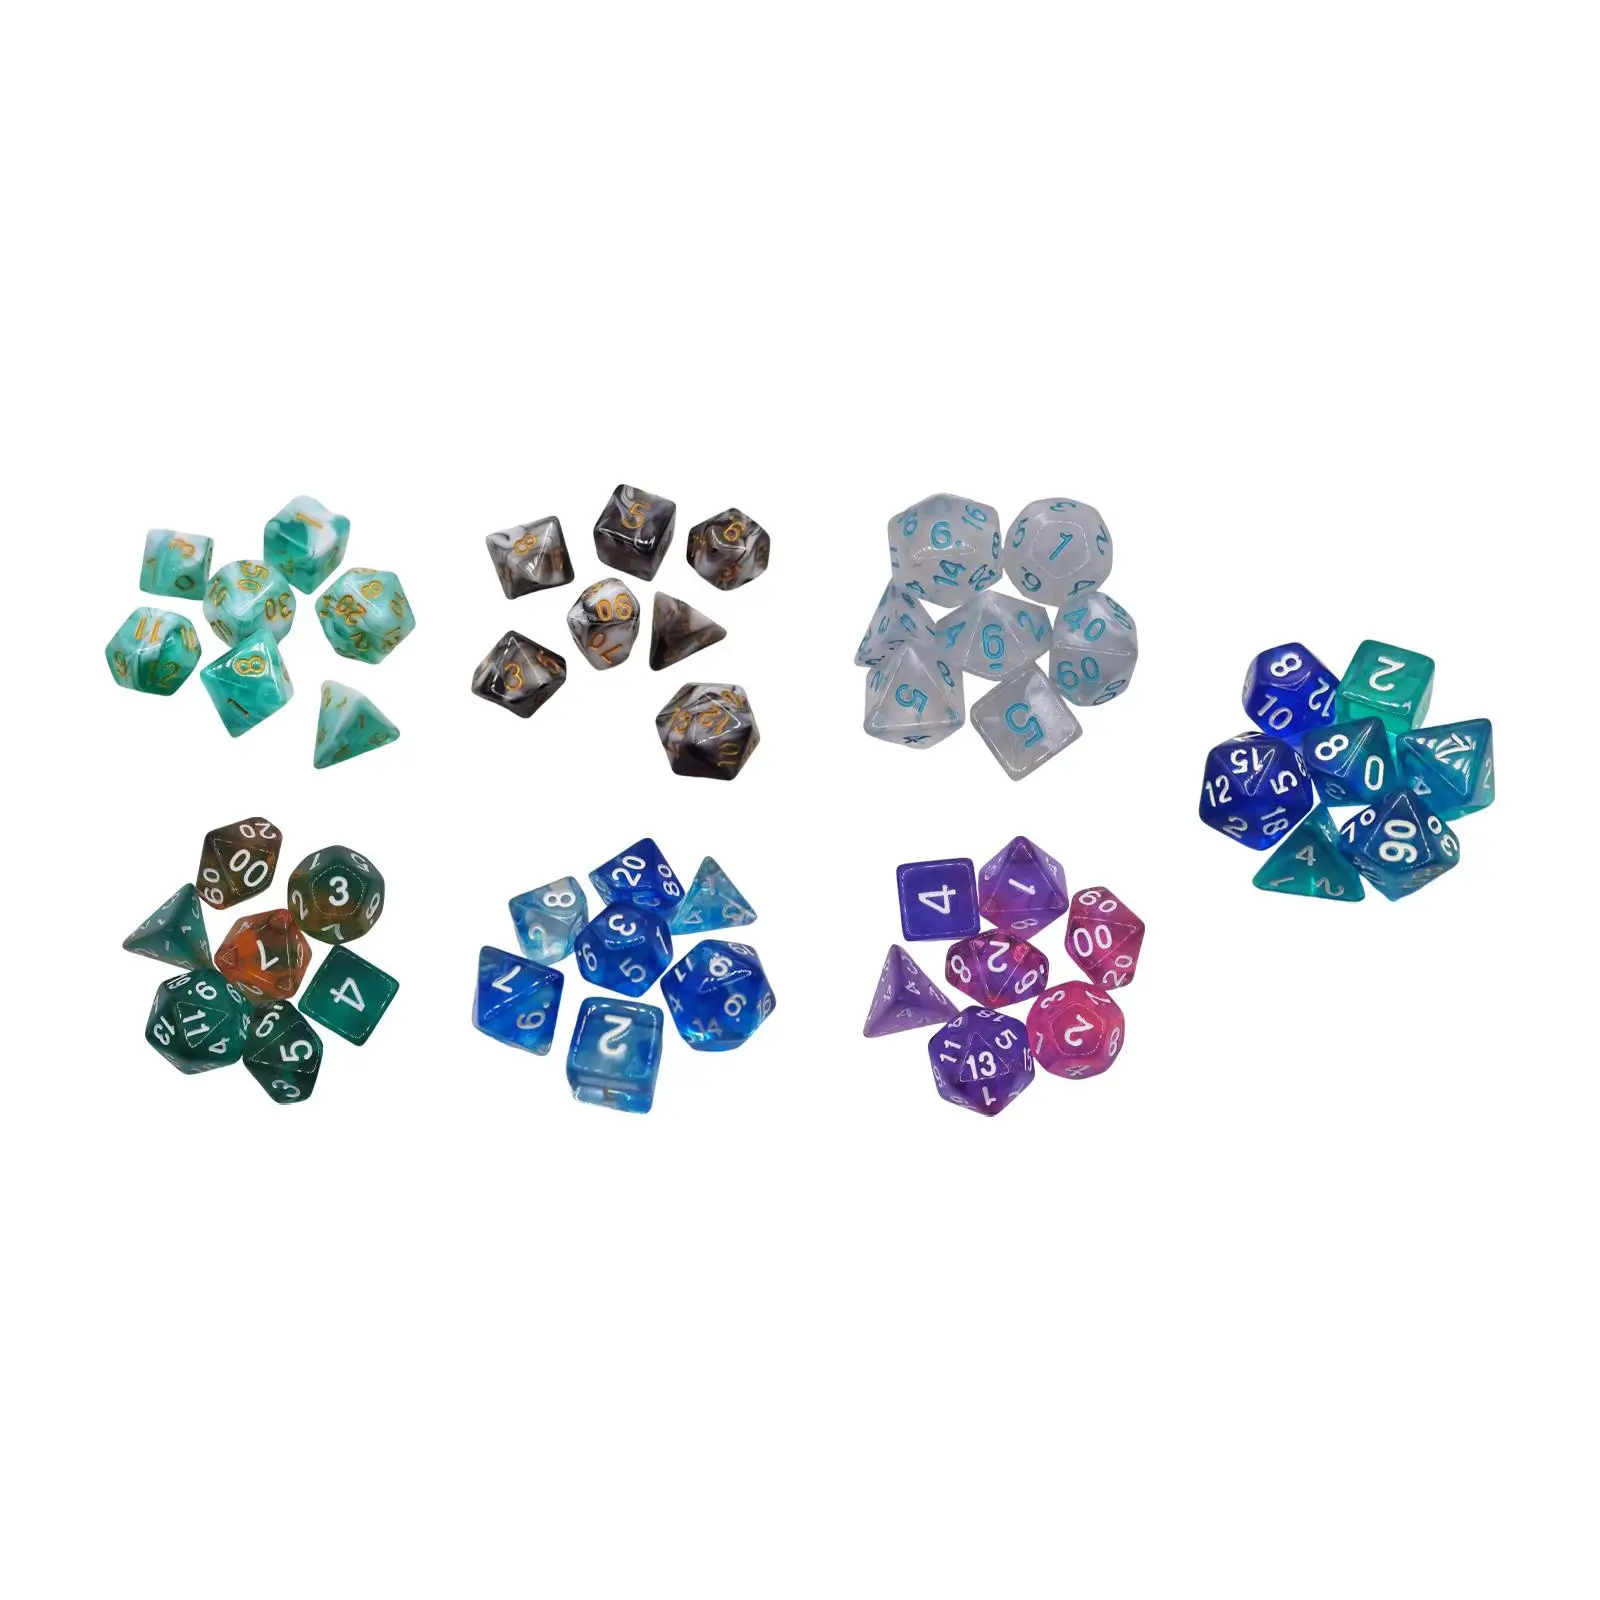 7x Polyhedral Dices D8 D4 D10 D12 D20 D6 Engraved Durable Rolling Dices for